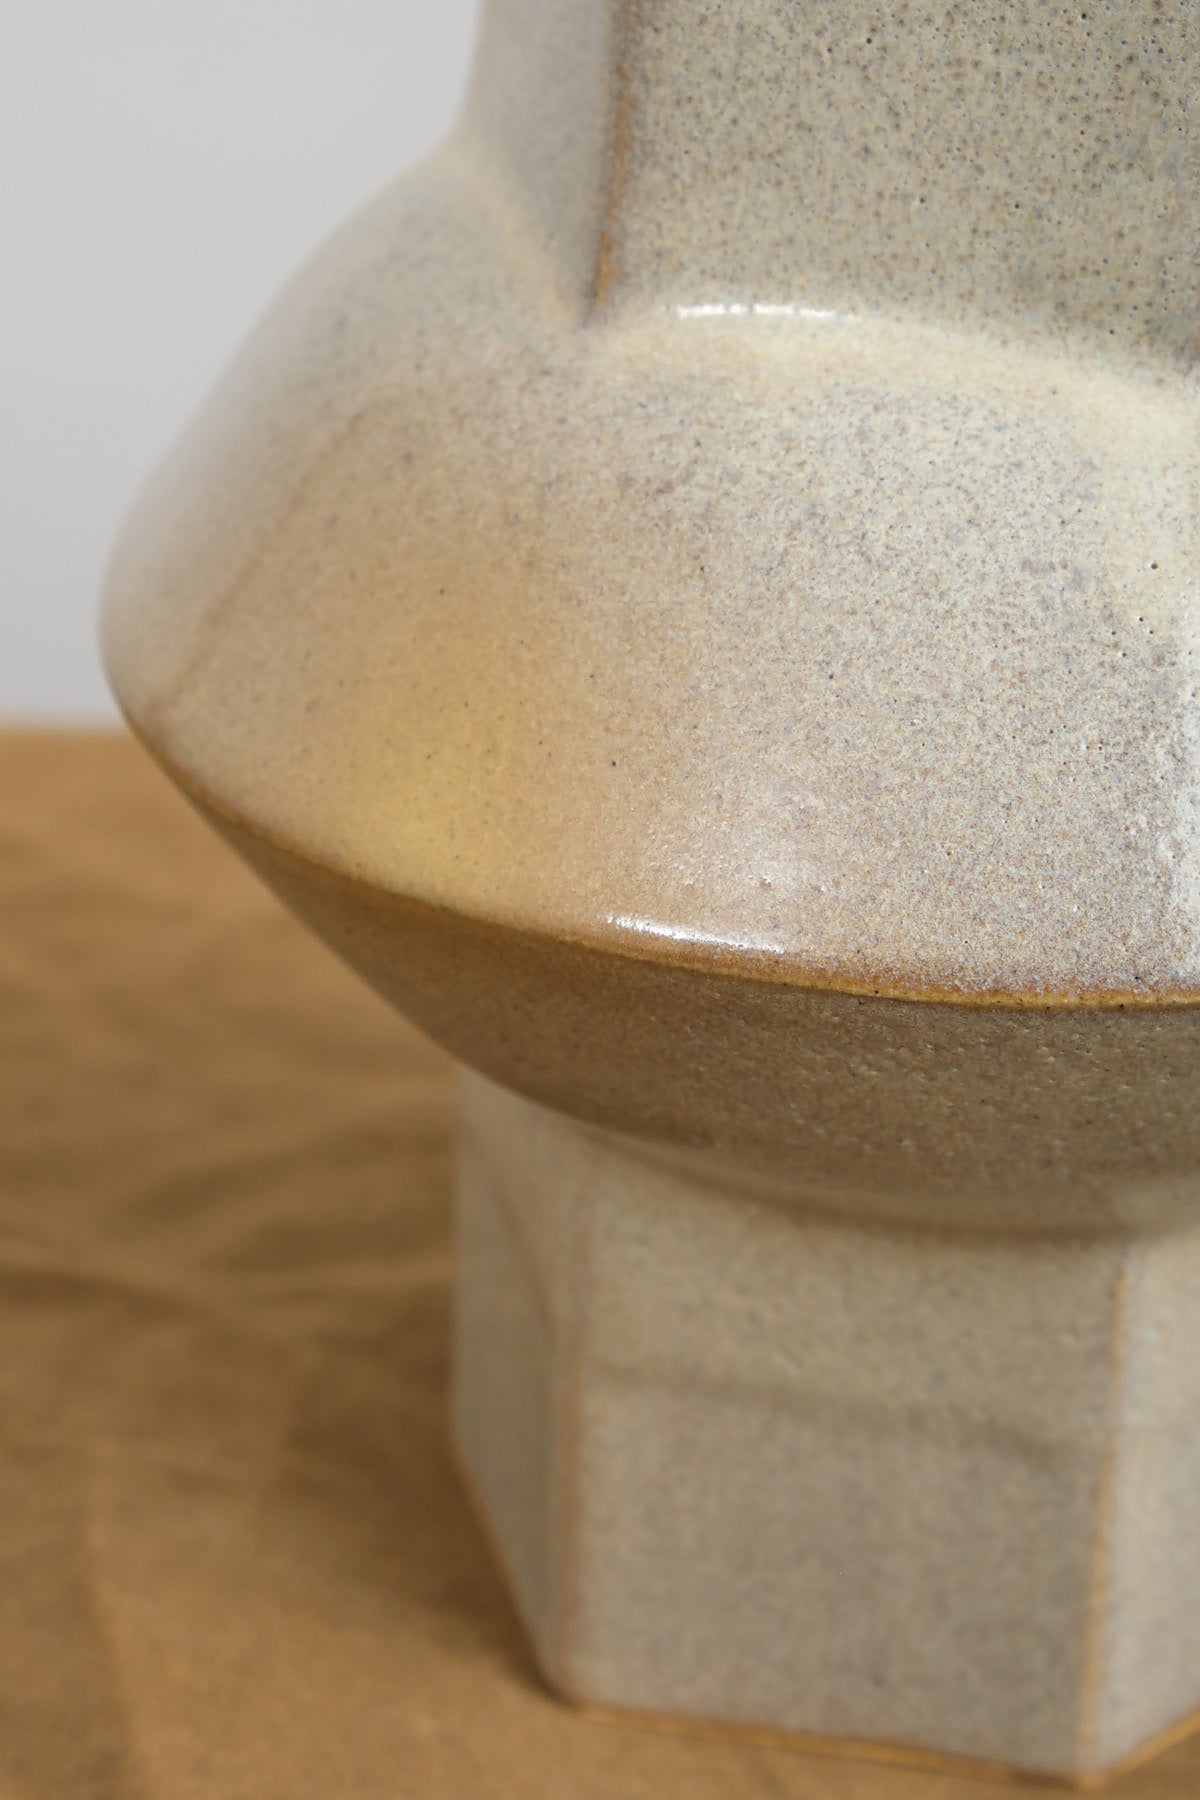 BZippy Small Oval Vase with Gloss Tan glaze and speckled details 